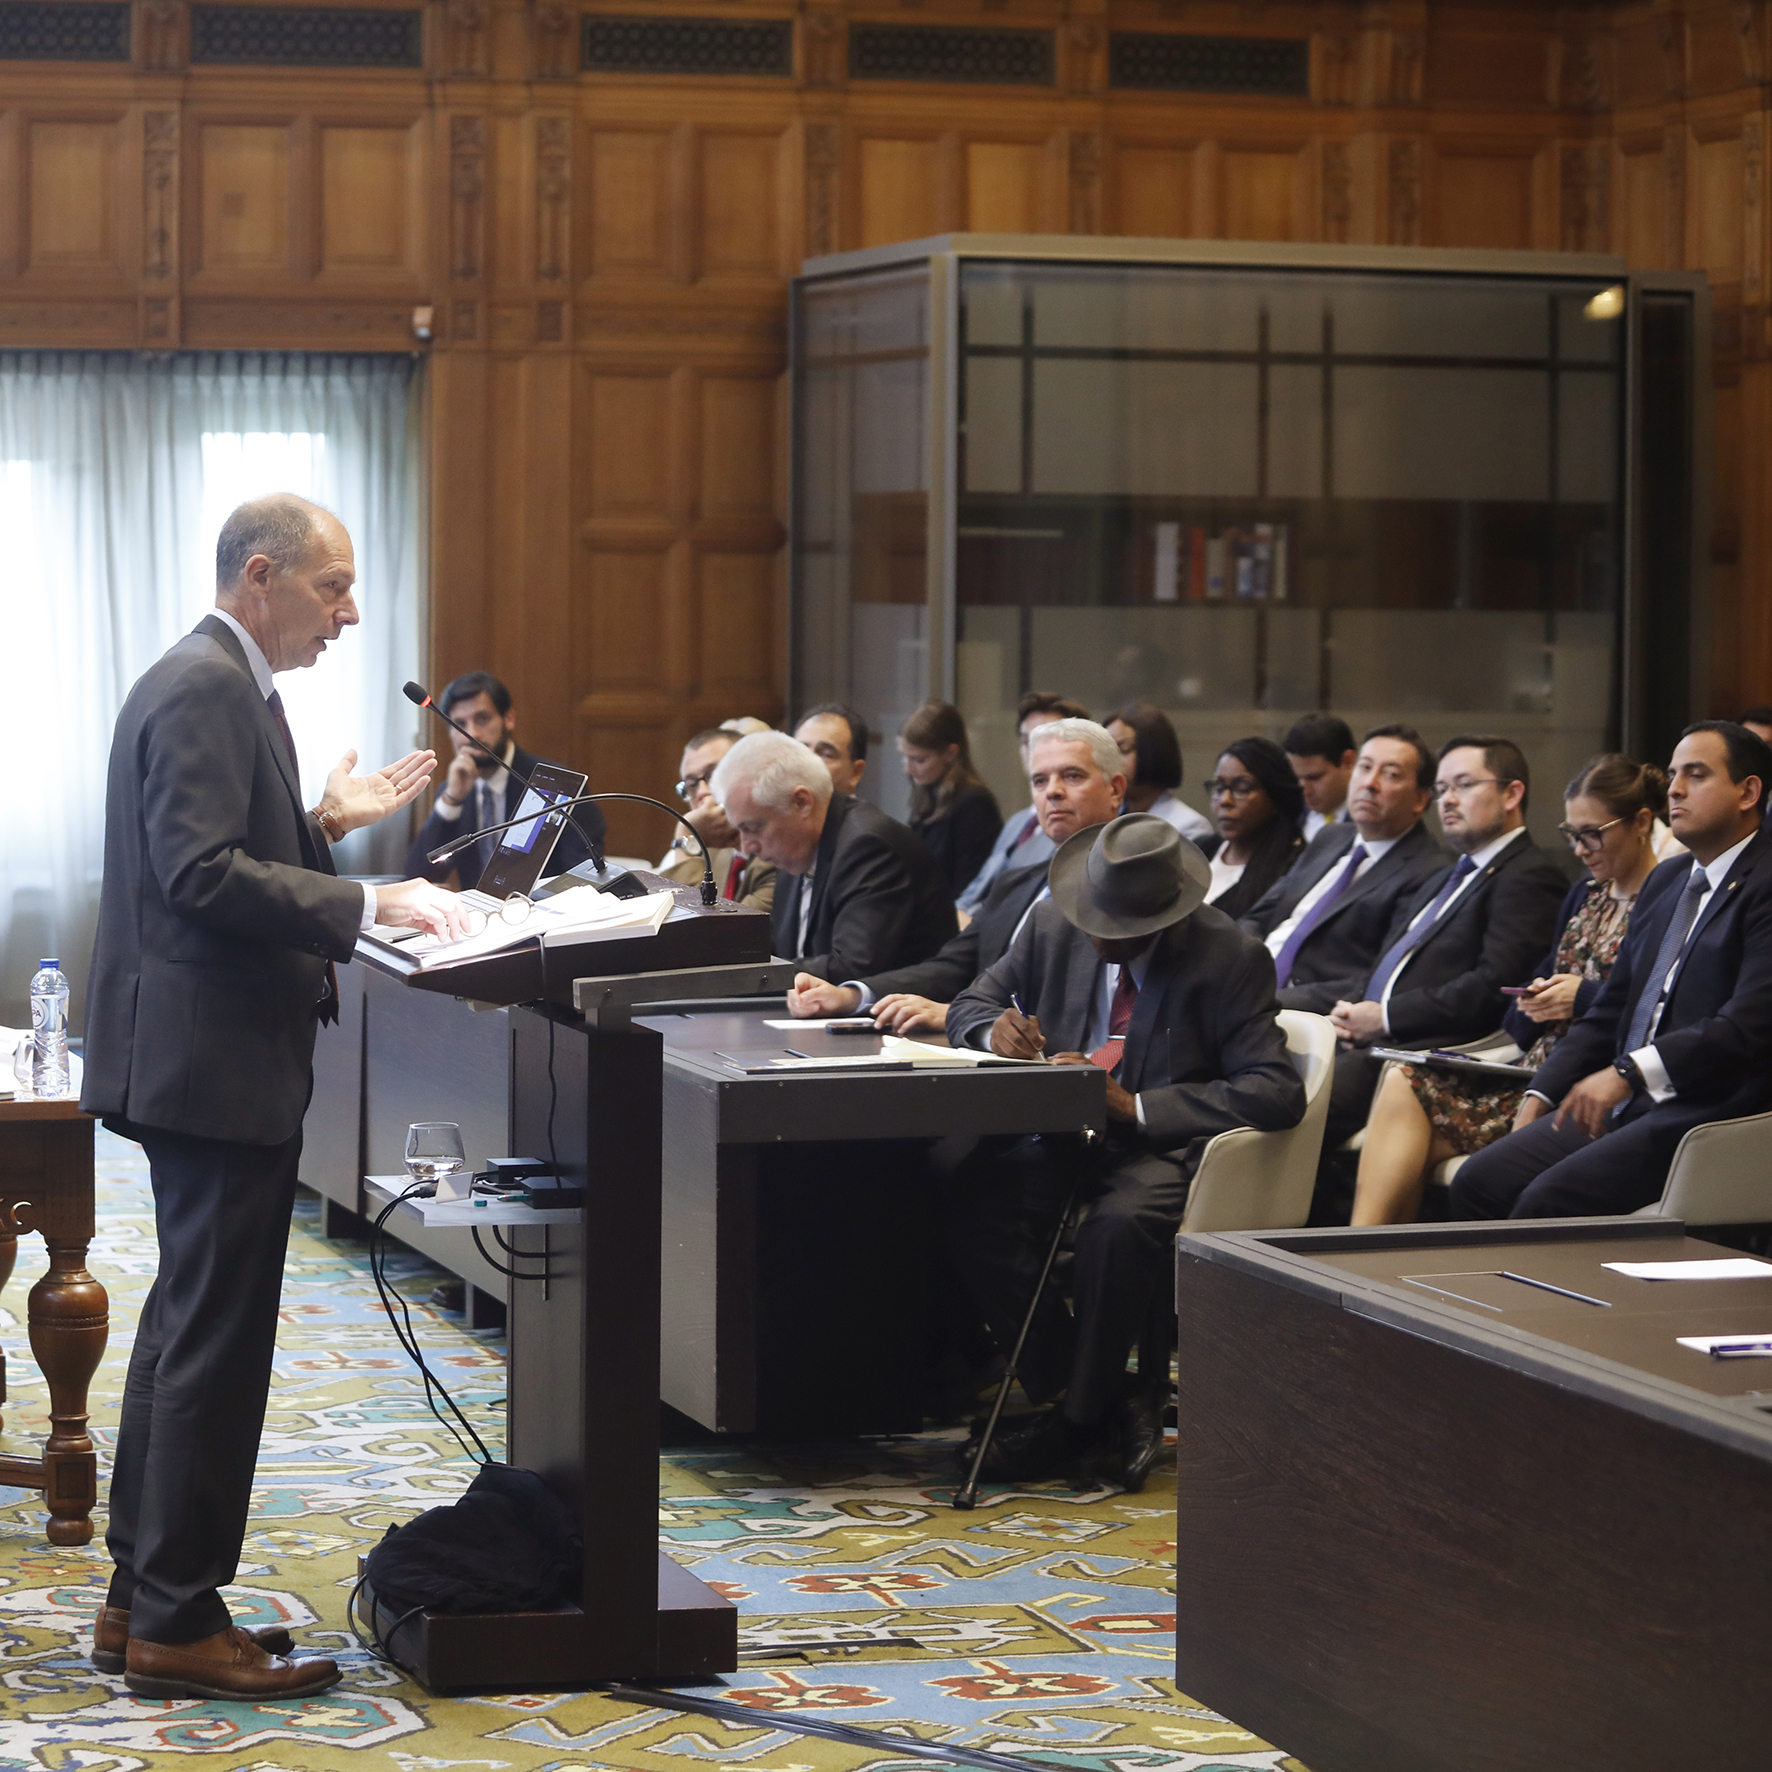 H.E. Mr. Philippe Gautier, Registrar of the International Court of Justice, gives an information session on the activities of the Court to the diplomatic representatives